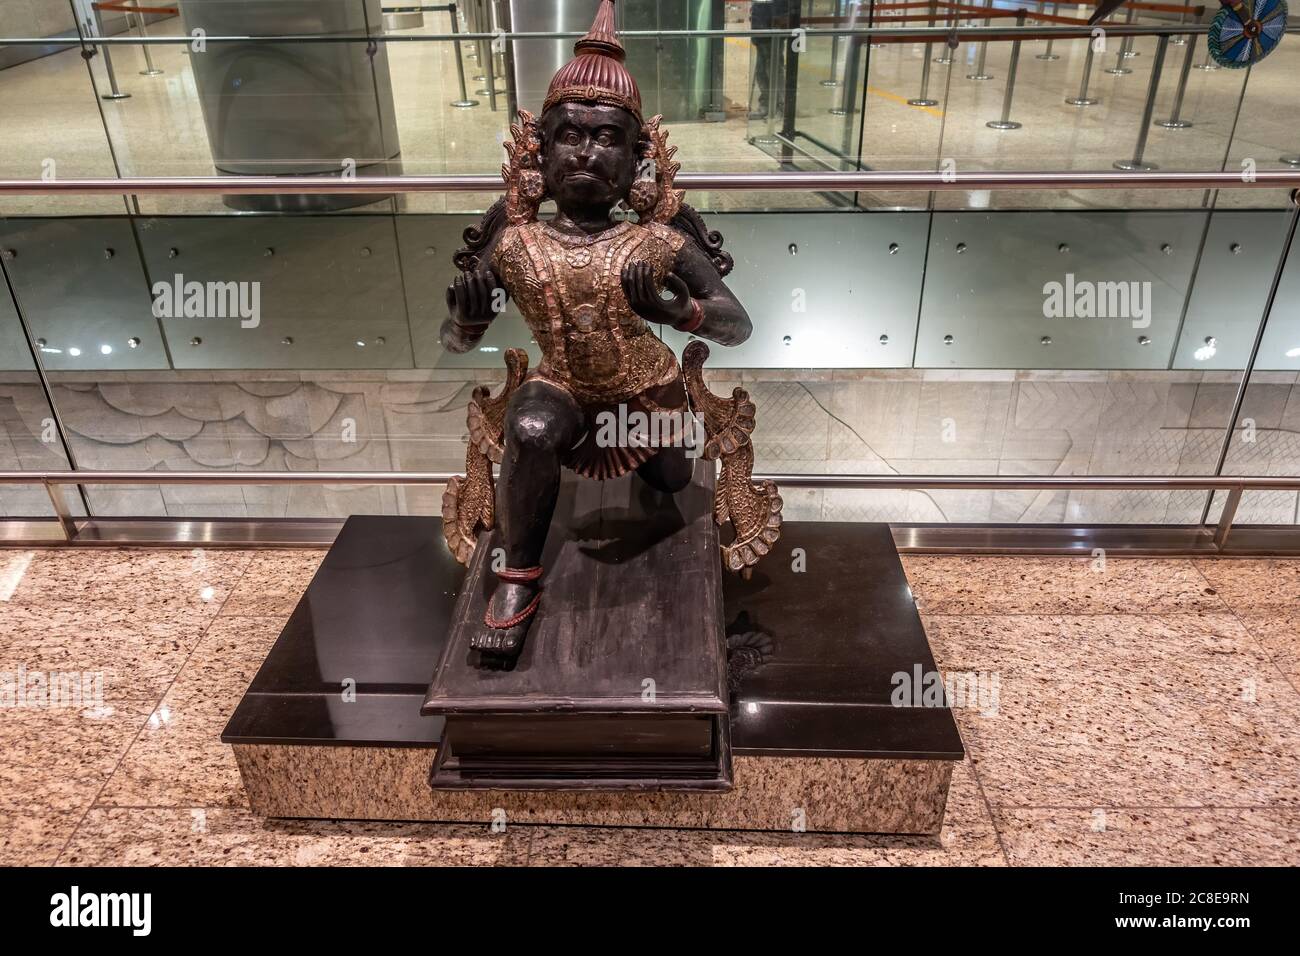 MUMBAI AIRPORT, INDIA DECEMBER 31, 2018: Publicly exhibited antic wooden sculpture of Hanuman, known as the Lord of Celibacy, Supreme evil destroyer Stock Photo